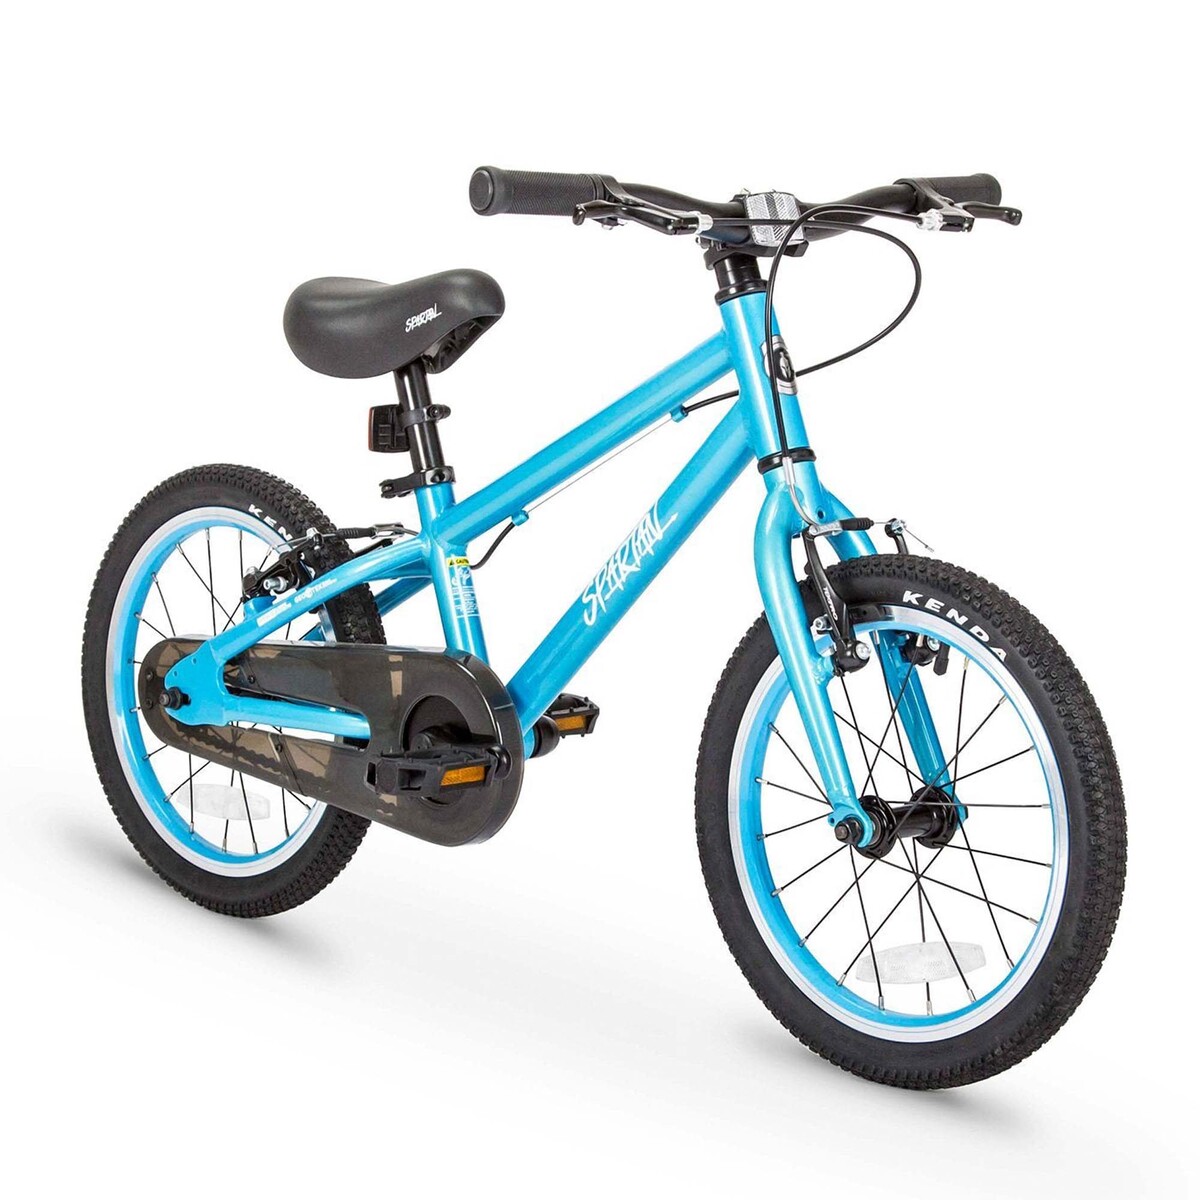 Spartan 16 inches Hyperlite Alloy Bicycle, Light Blue, SP-3137